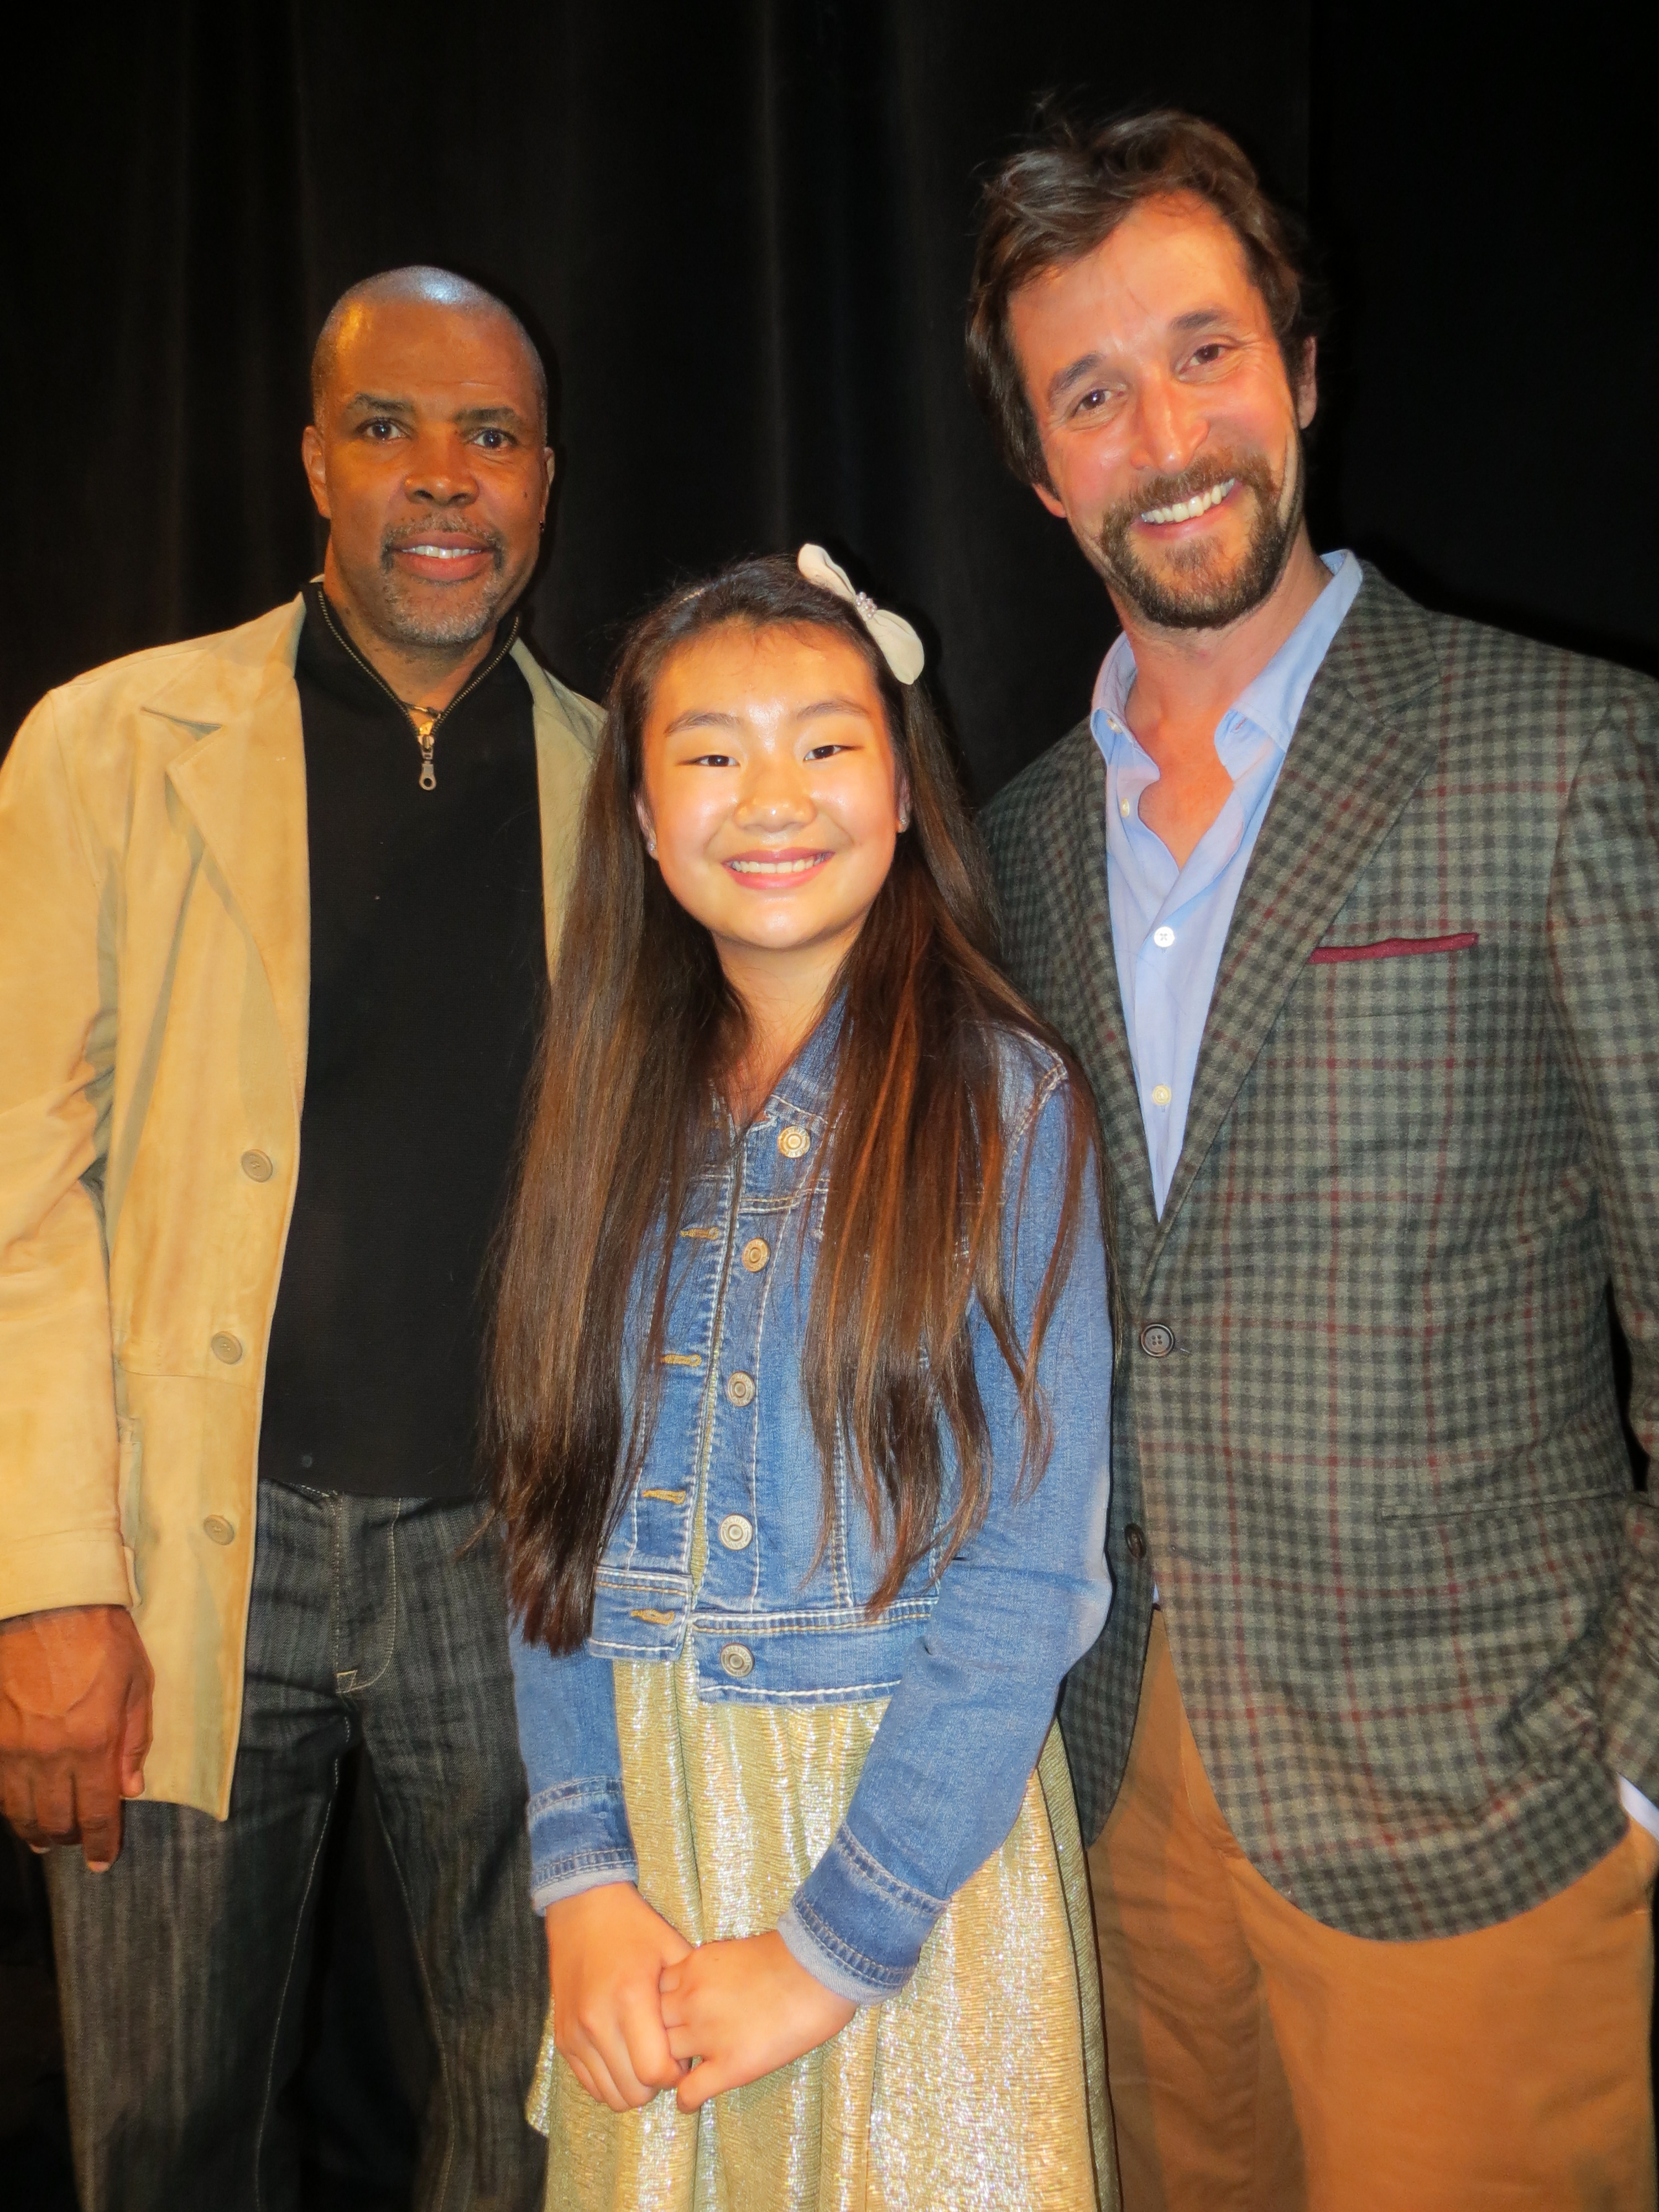 Young Playwright's Festival with Noah Wyle and Eriq La Salle